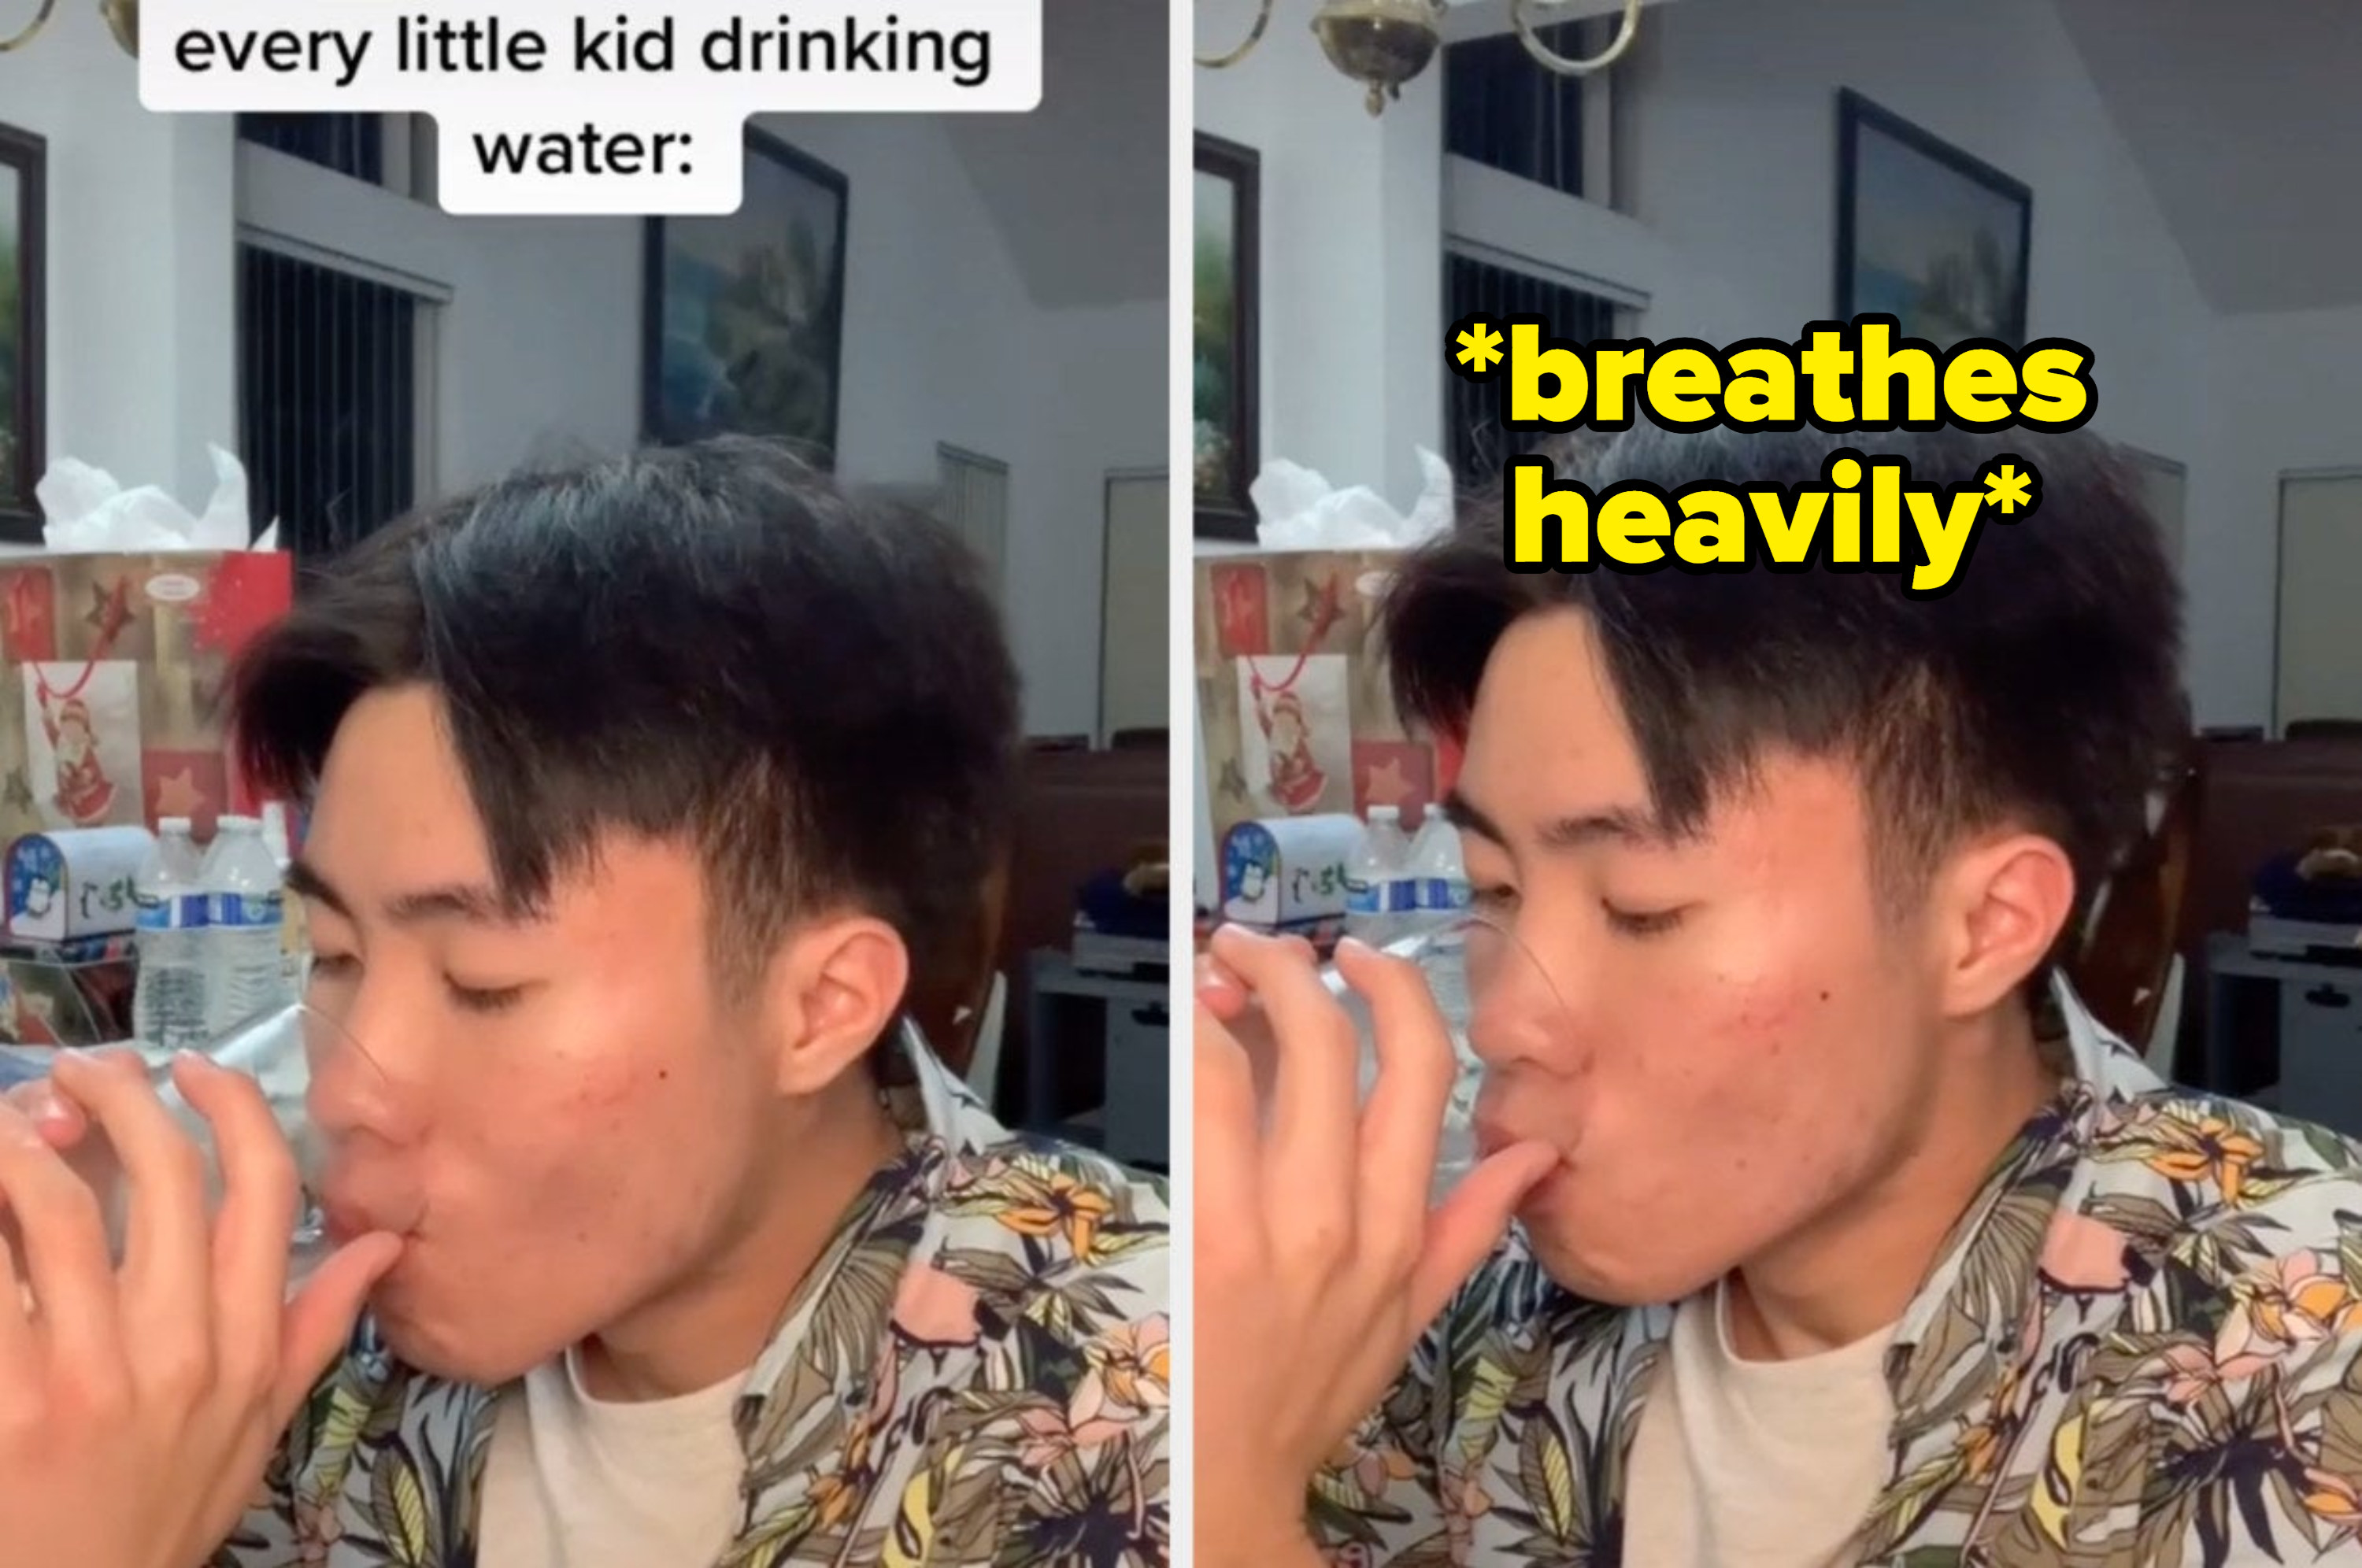 A TikToker drinks a cup of water while breathing heavily